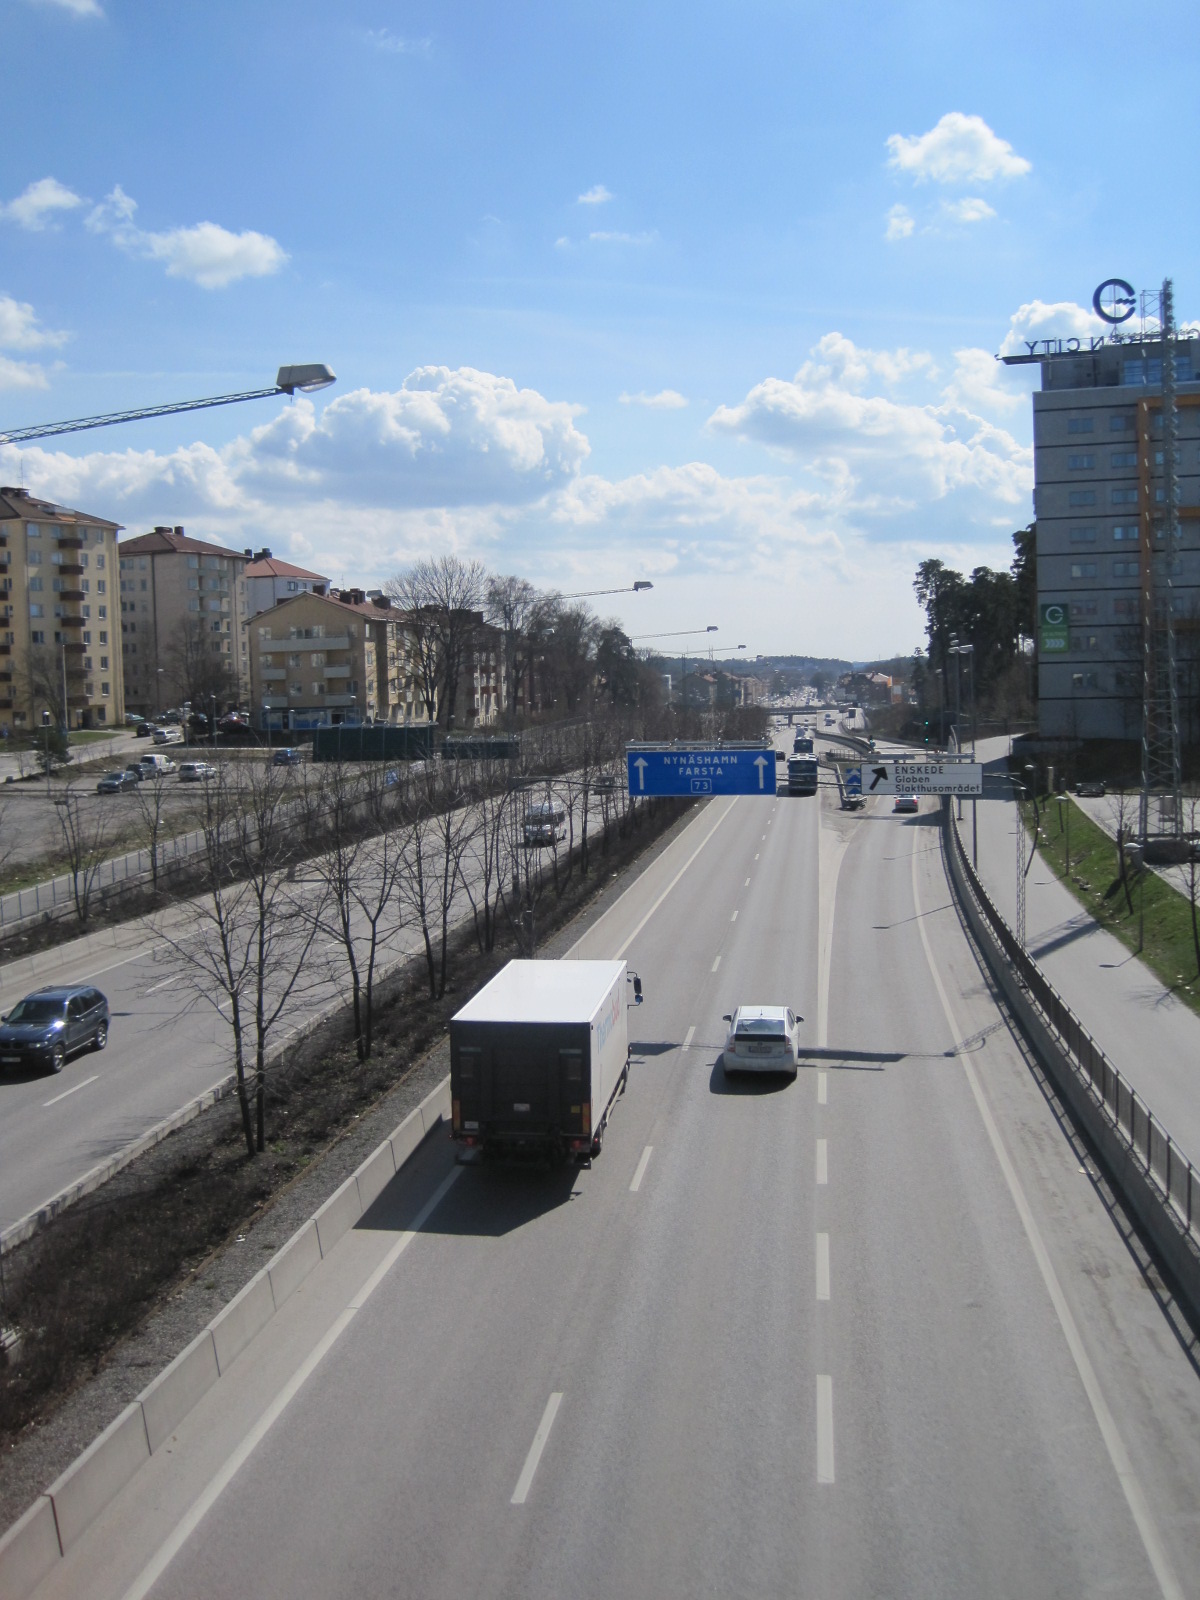 two trucks drive on a street in front of buildings